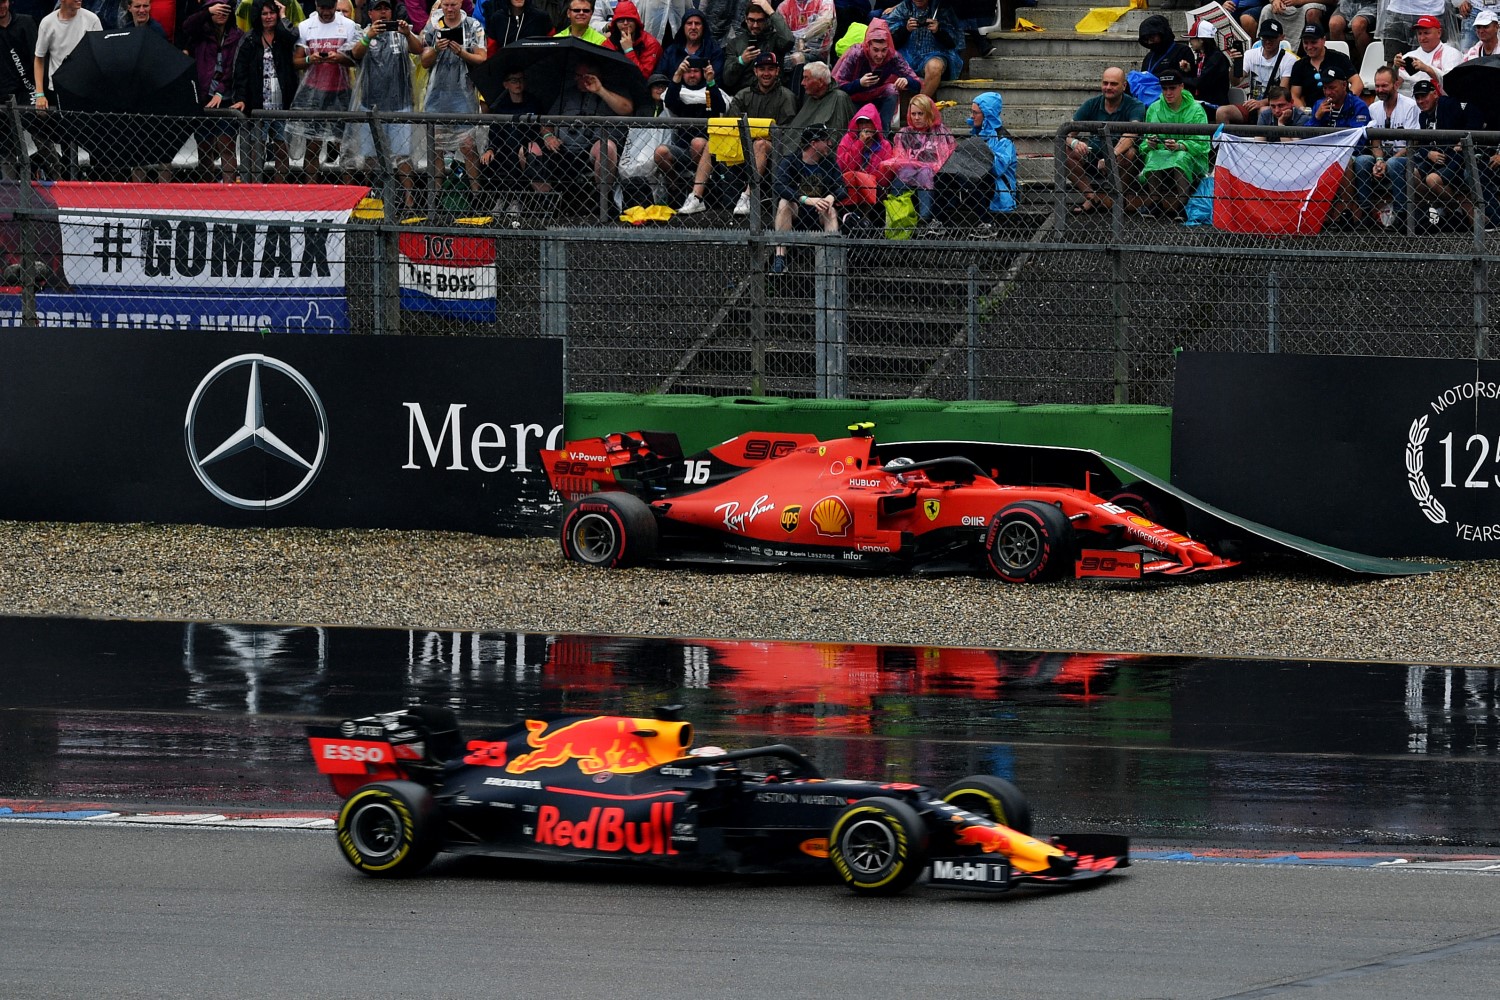 Max Verstappen leads as Charles Leclerc stuffs his car into the barriers